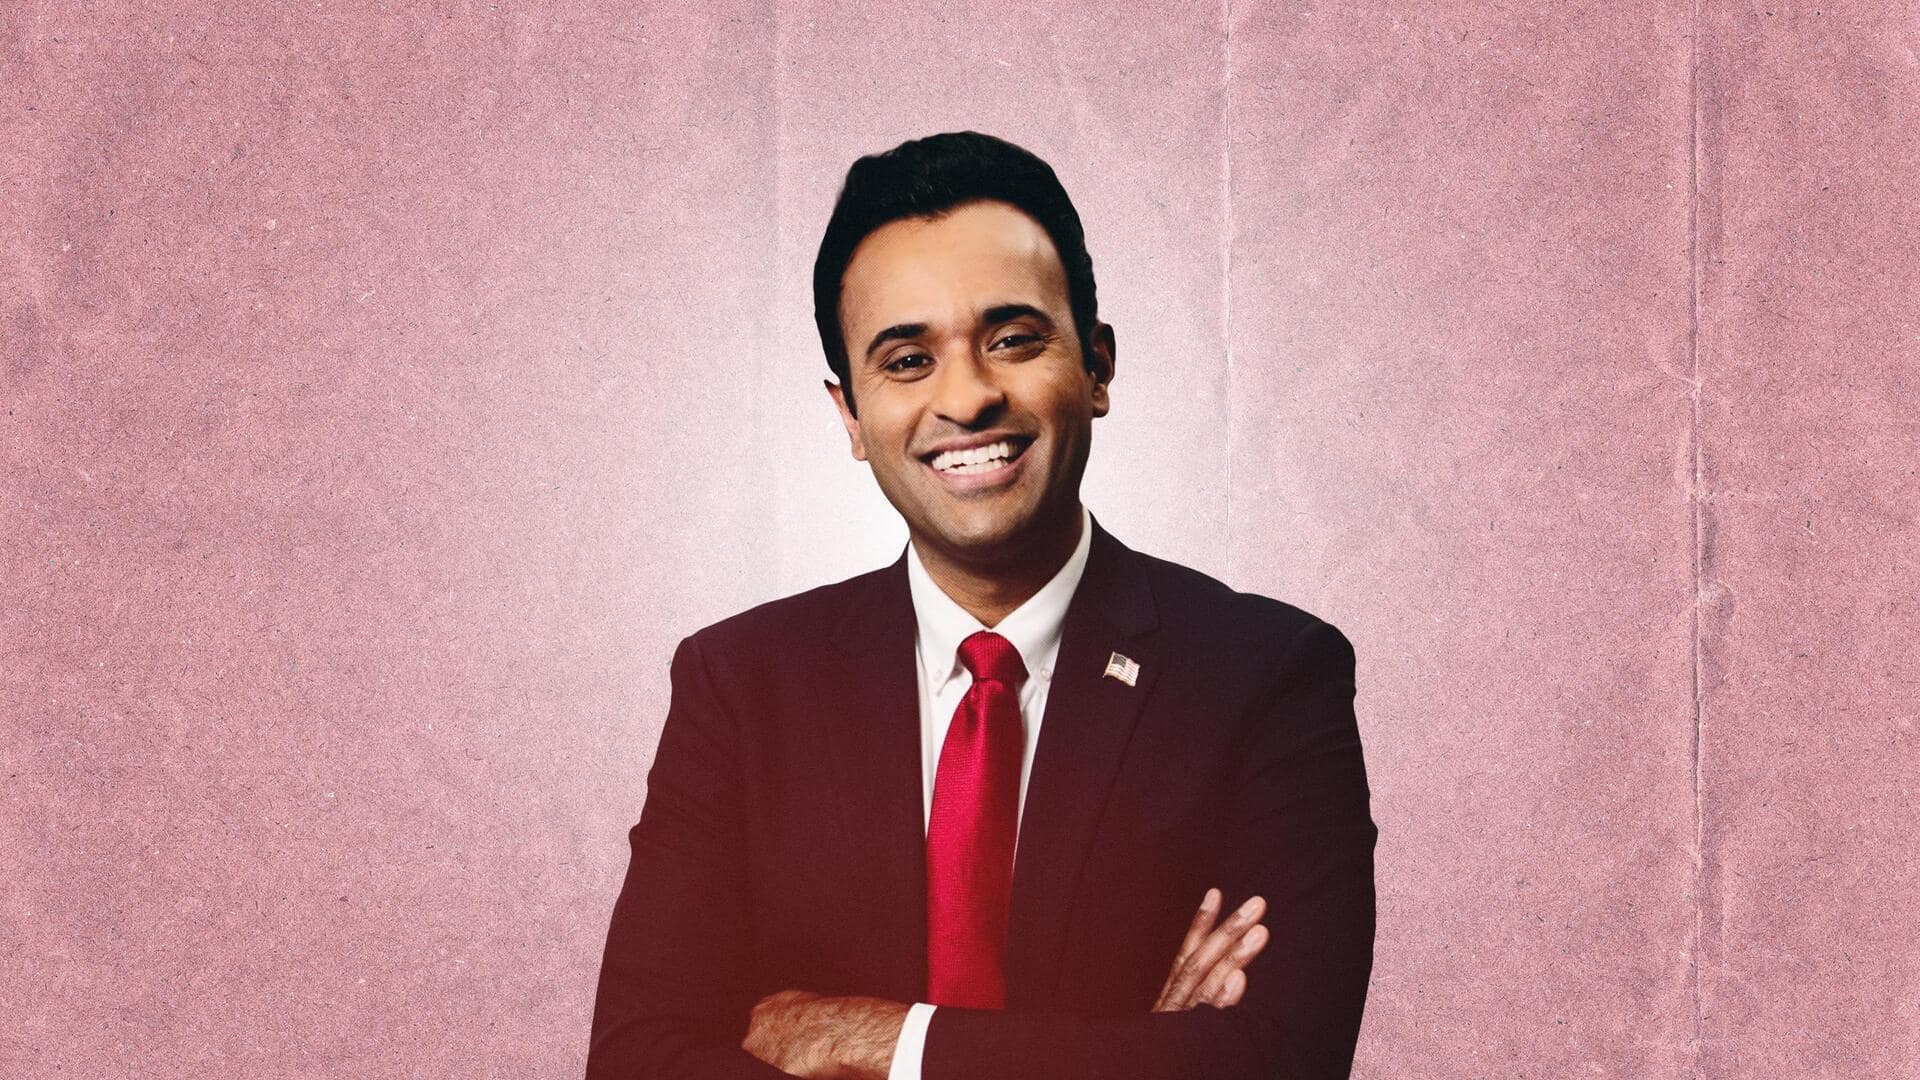 All about Vivek Ramaswamy, running for US president